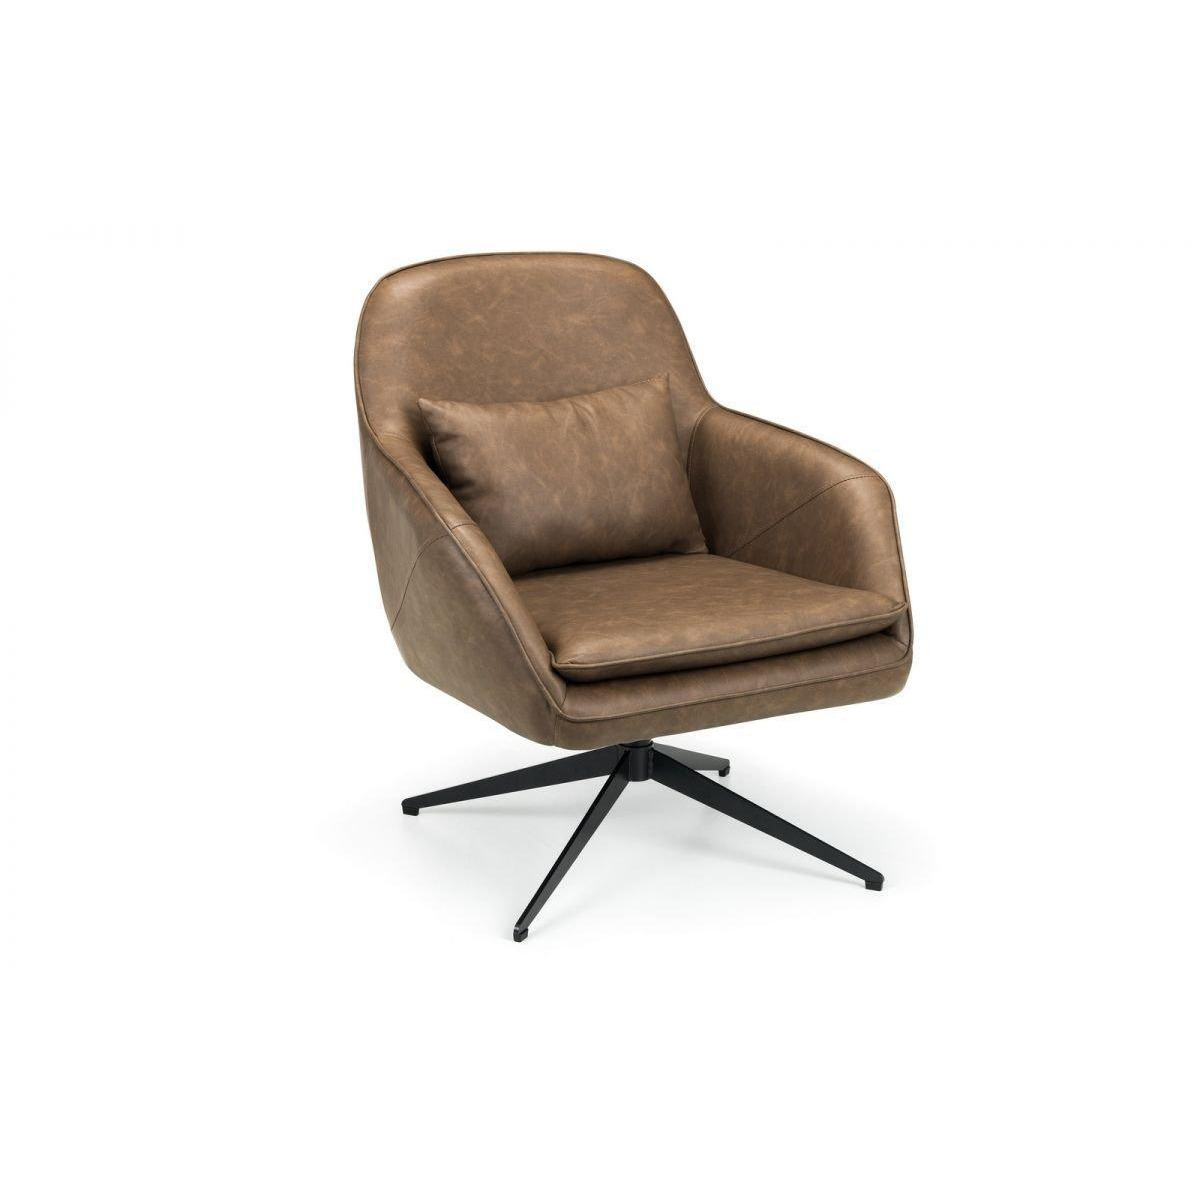 Brown Faux Leather Swivel Chair - image 1